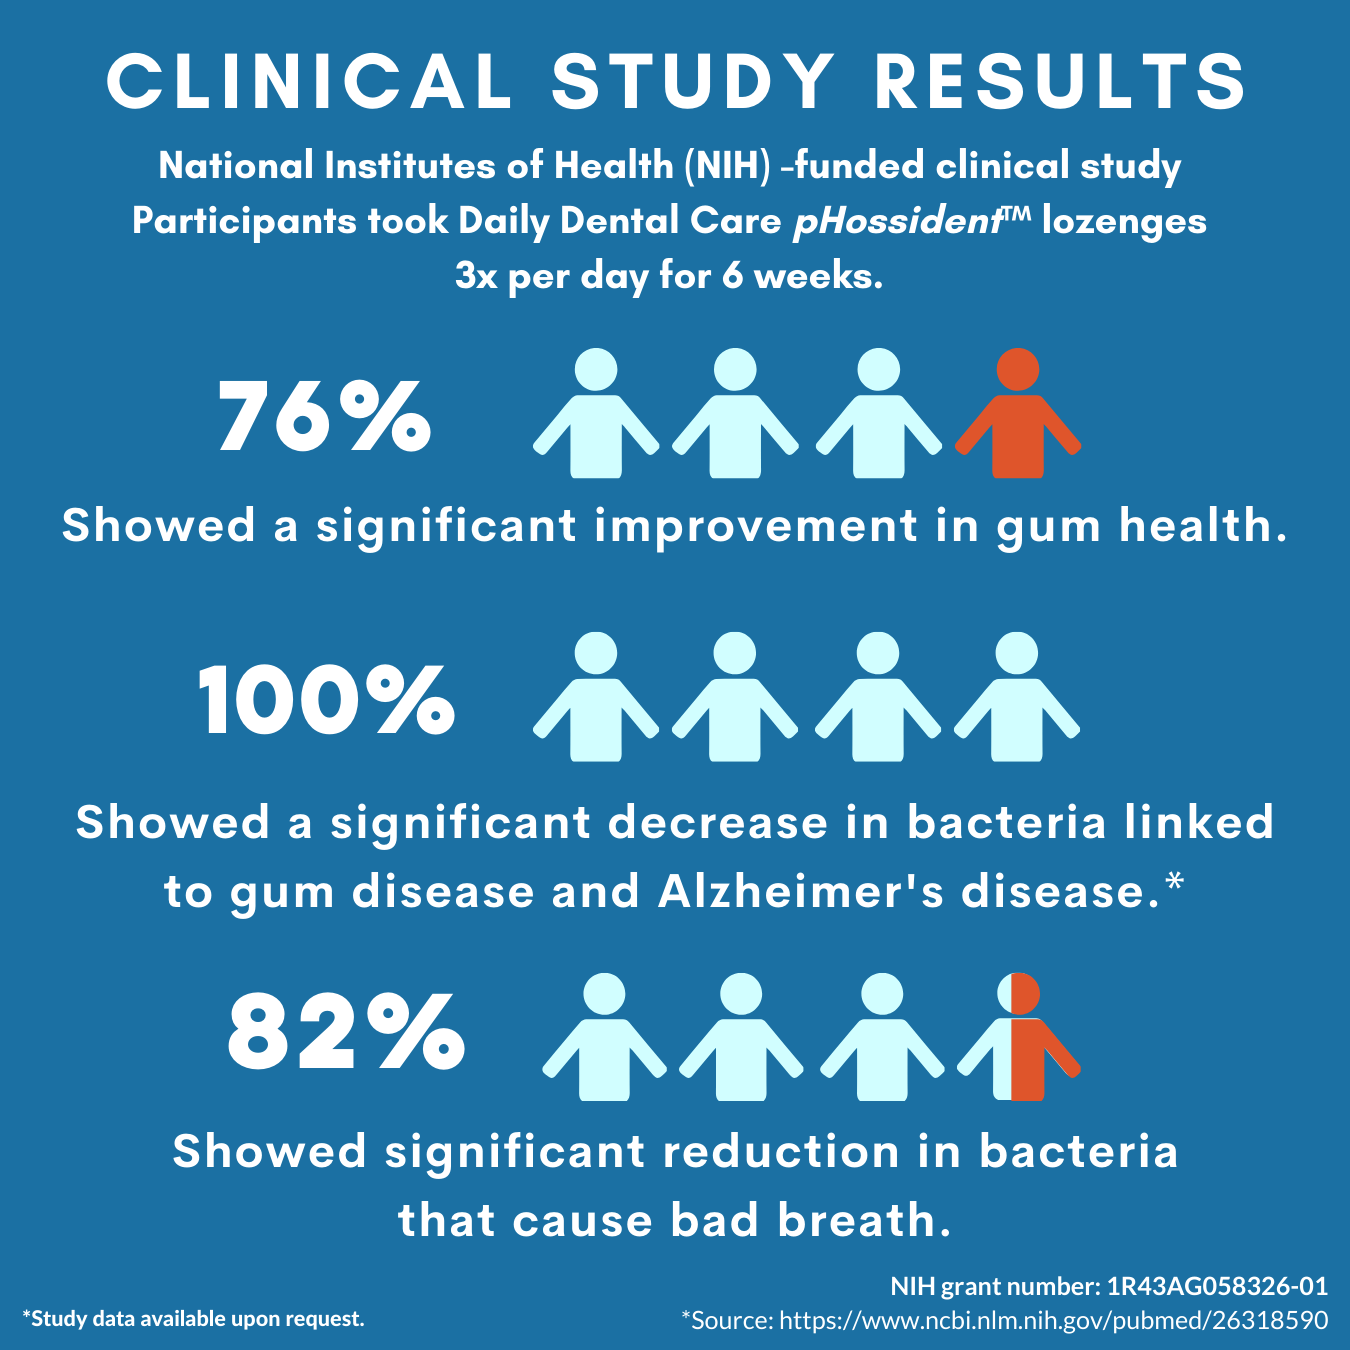 NIH Clinical study overview - Infographic - 2020 (1).png__PID:61fa170f-0ec7-49d8-8d4c-d2614c1f9a68